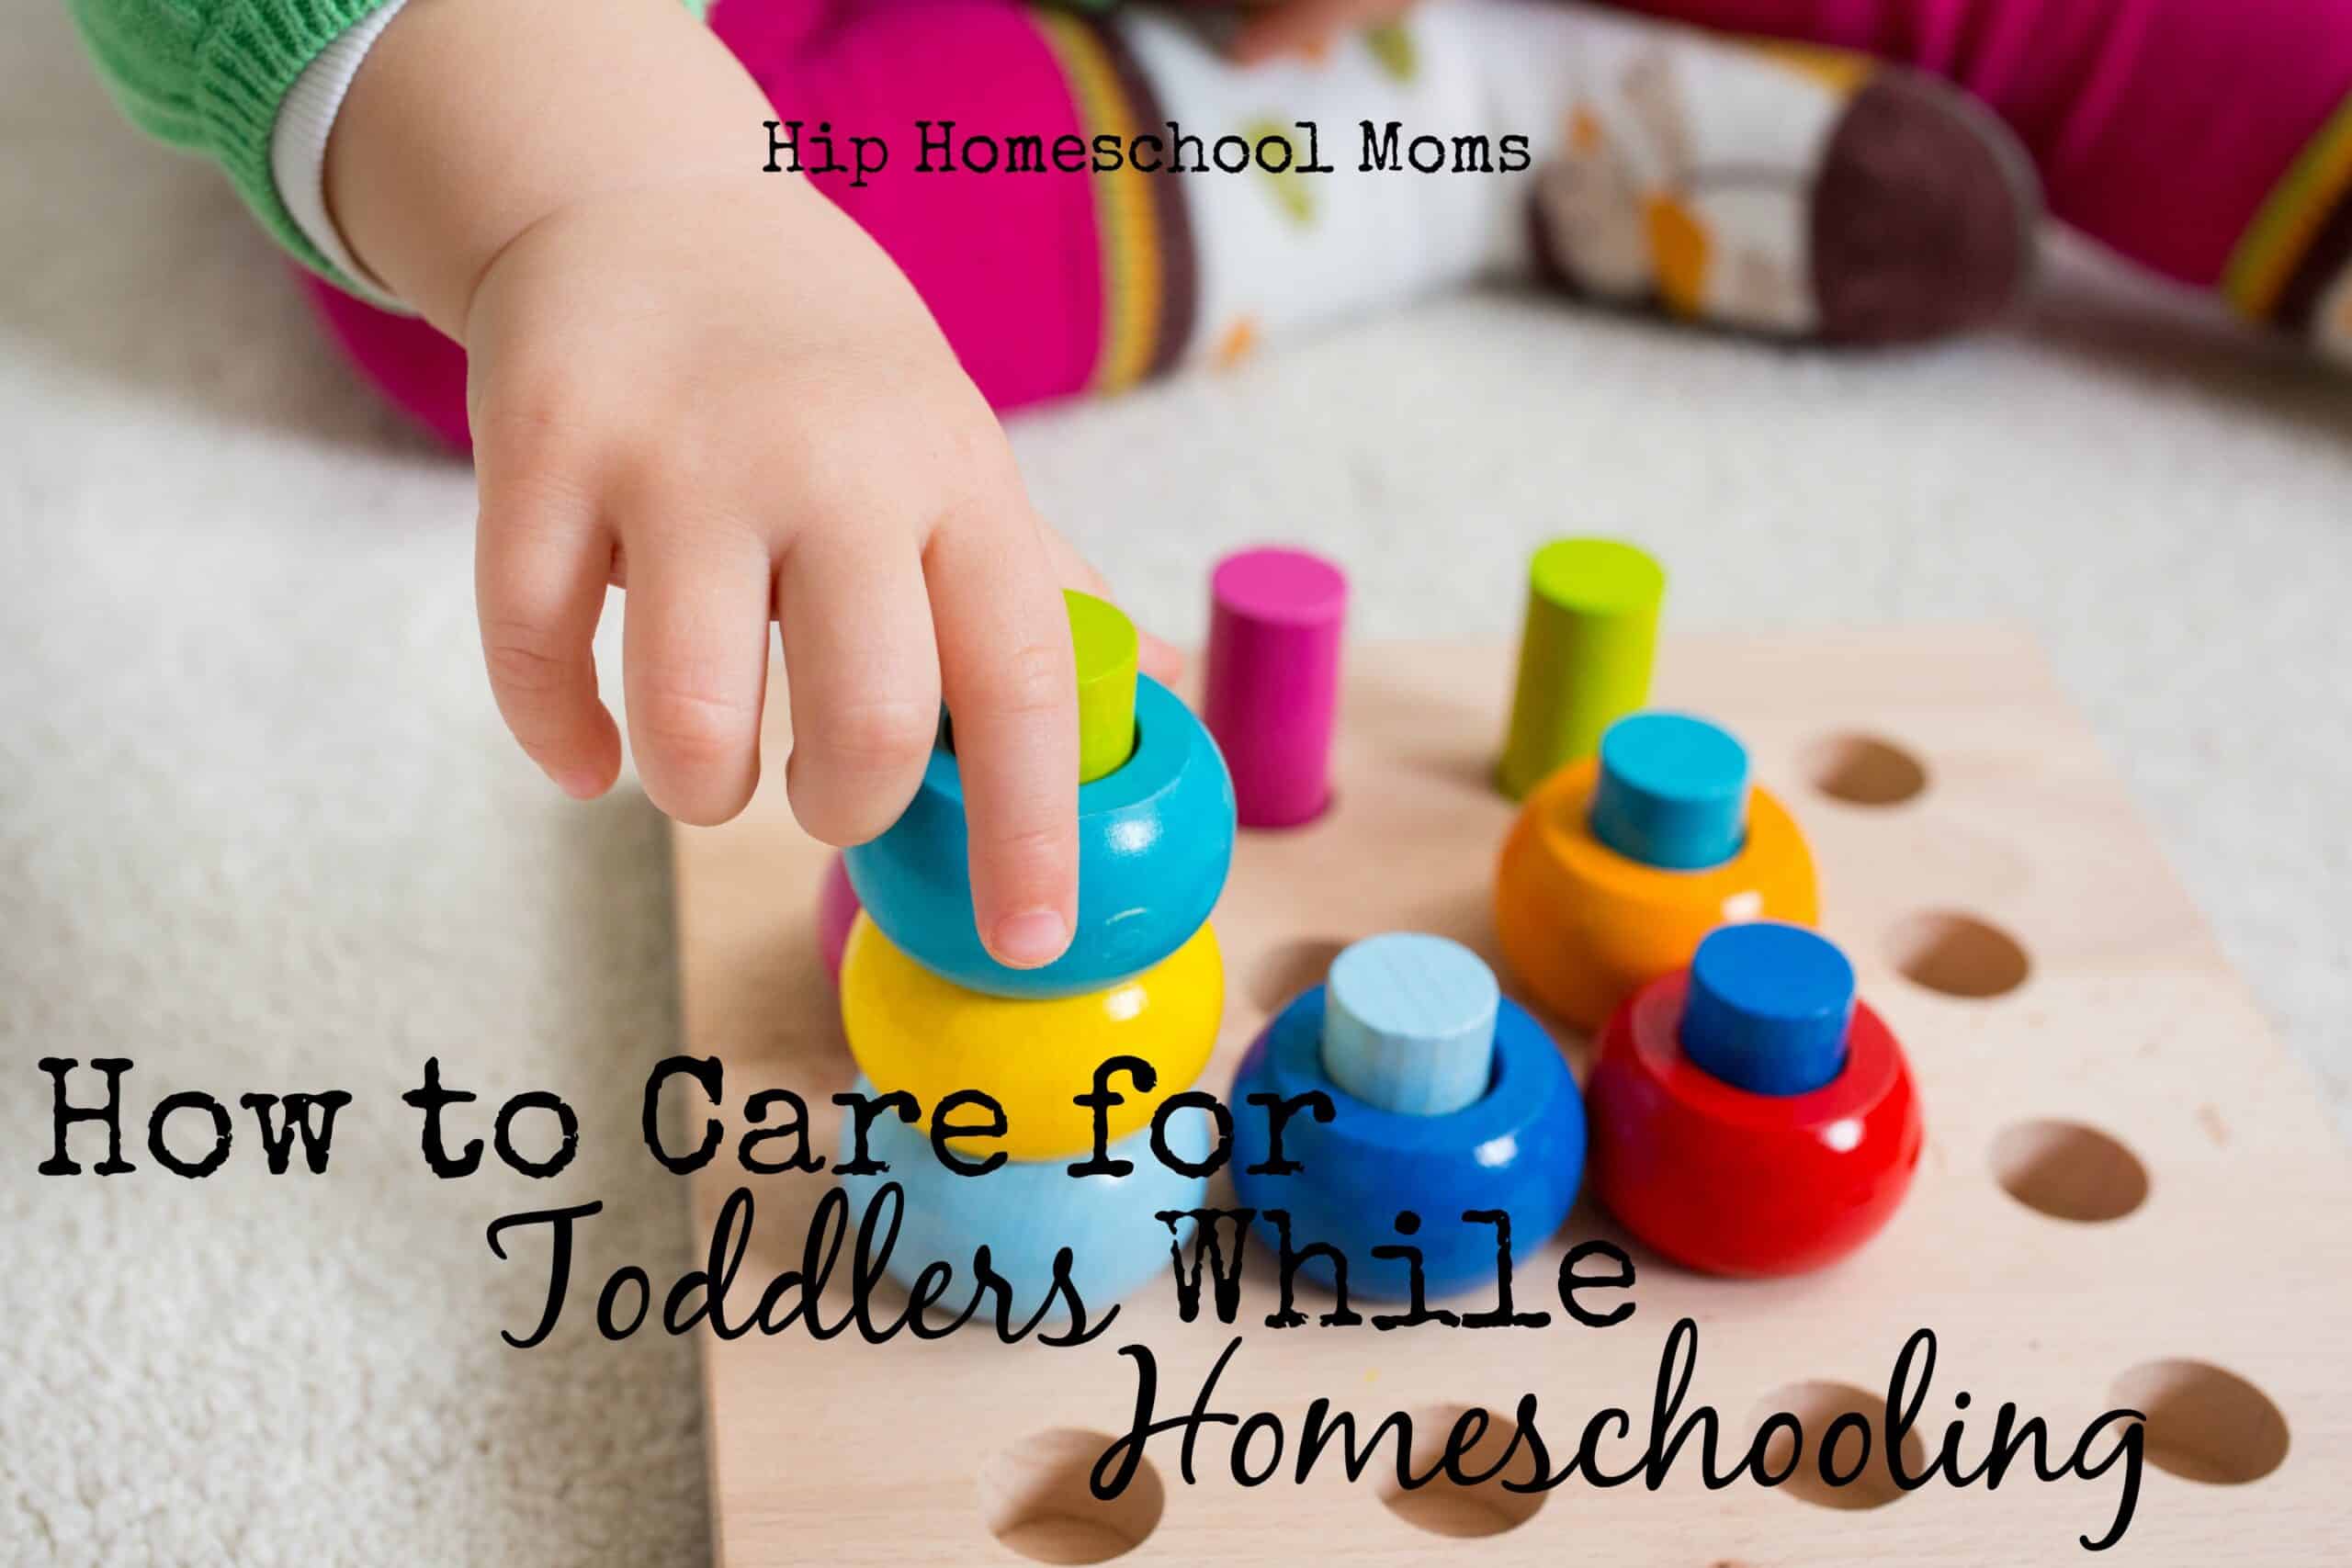 HHM How to Care for Toddlers While Homeschooling